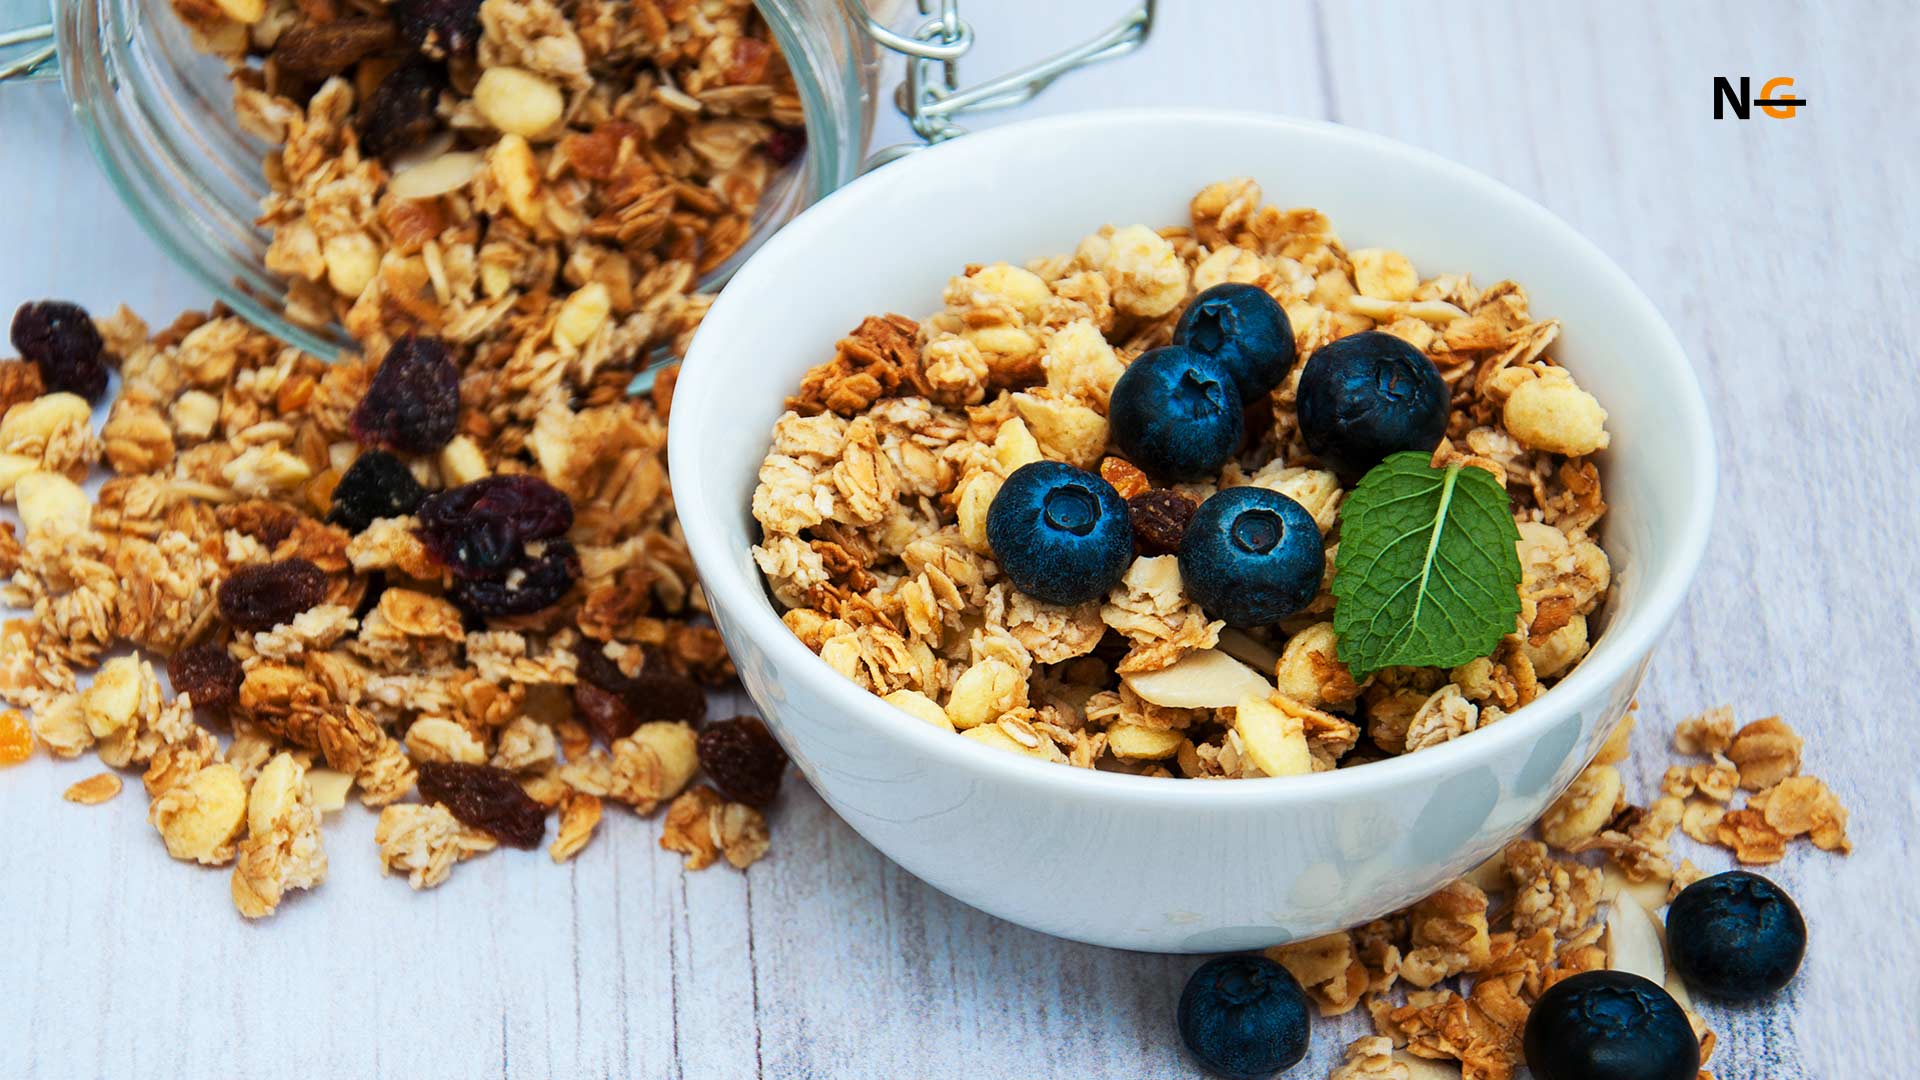 Why Does Granola Have Gluten